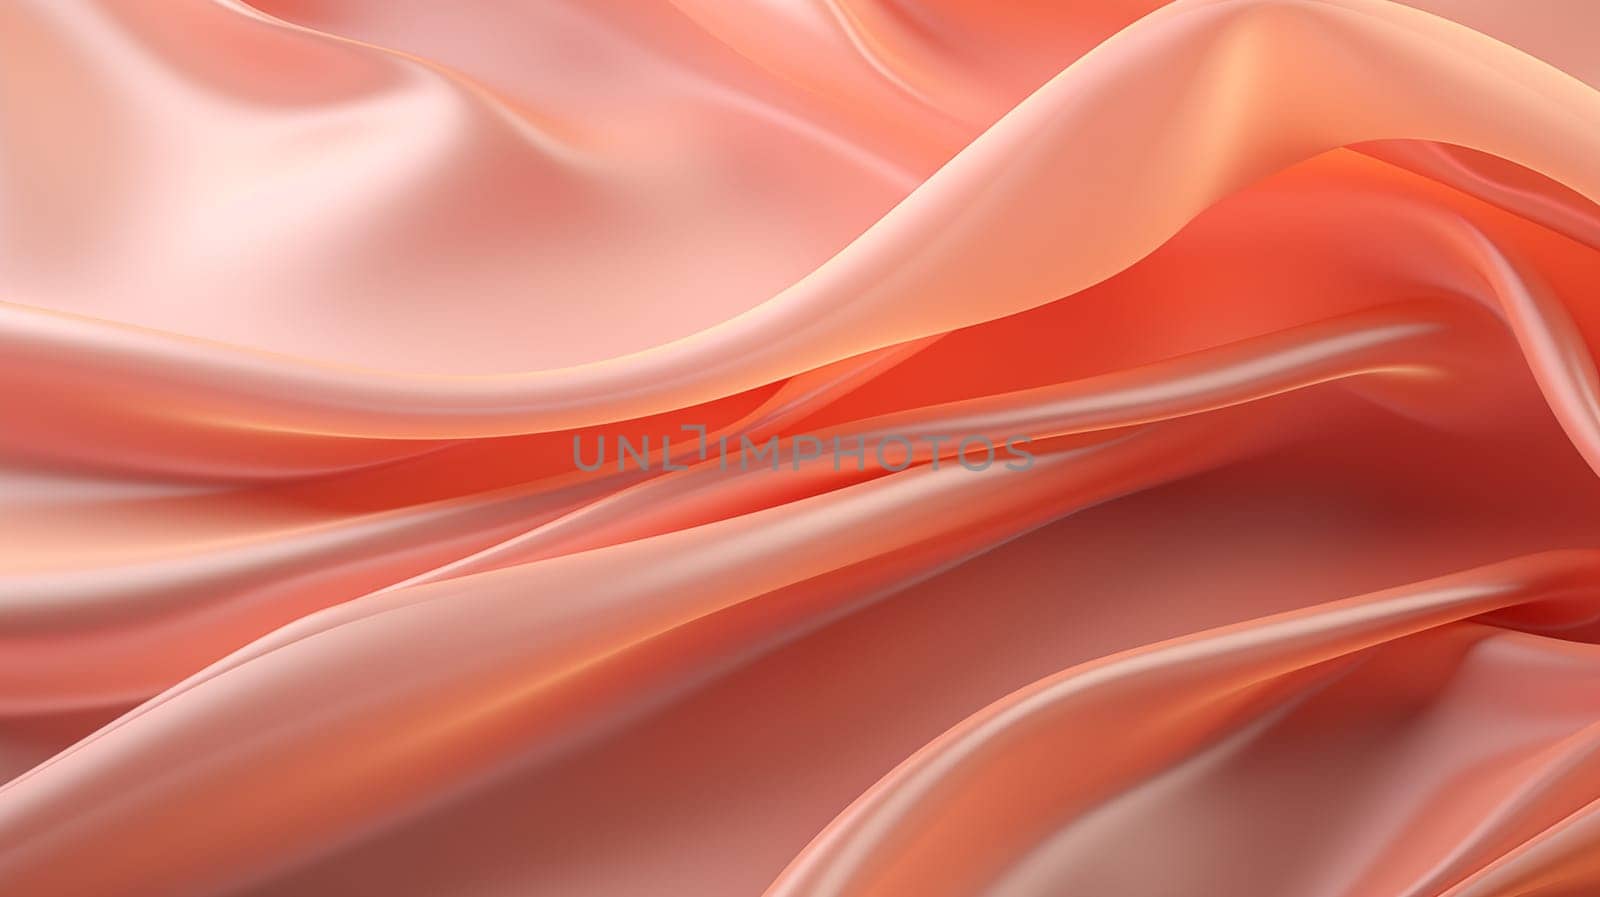 Smooth waves of luxurious peach-fuzz colored silk fabric with a soft, reflective texture.